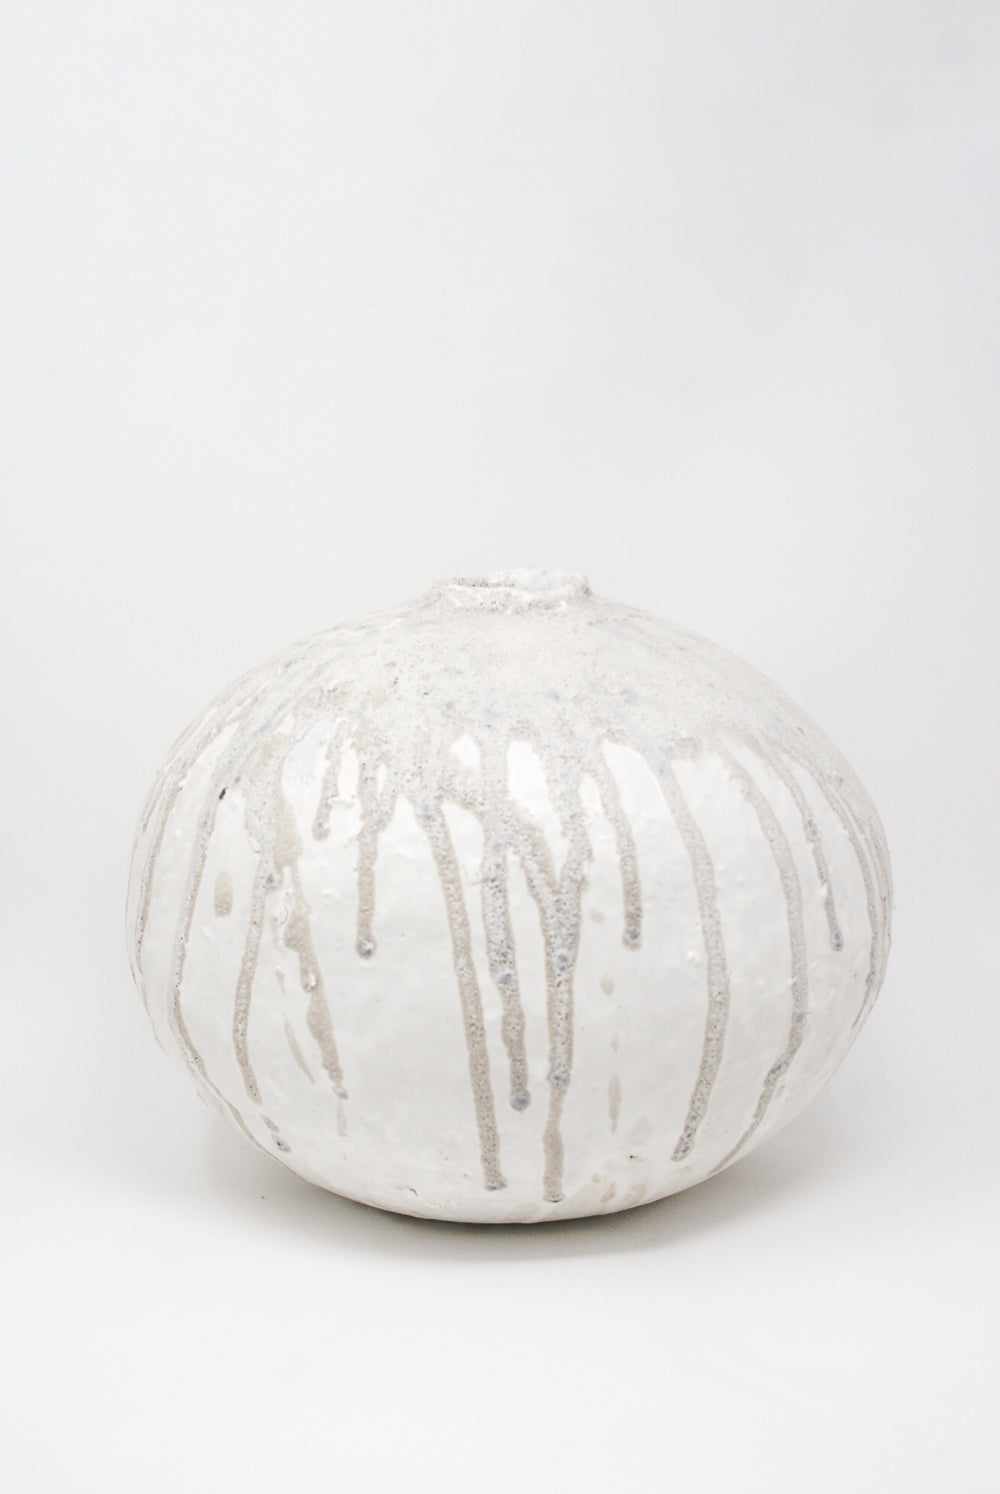 MONDAYS - Giant Lava Moon Vase in Textured Lava Glaze on a Groggy Clay Body side view